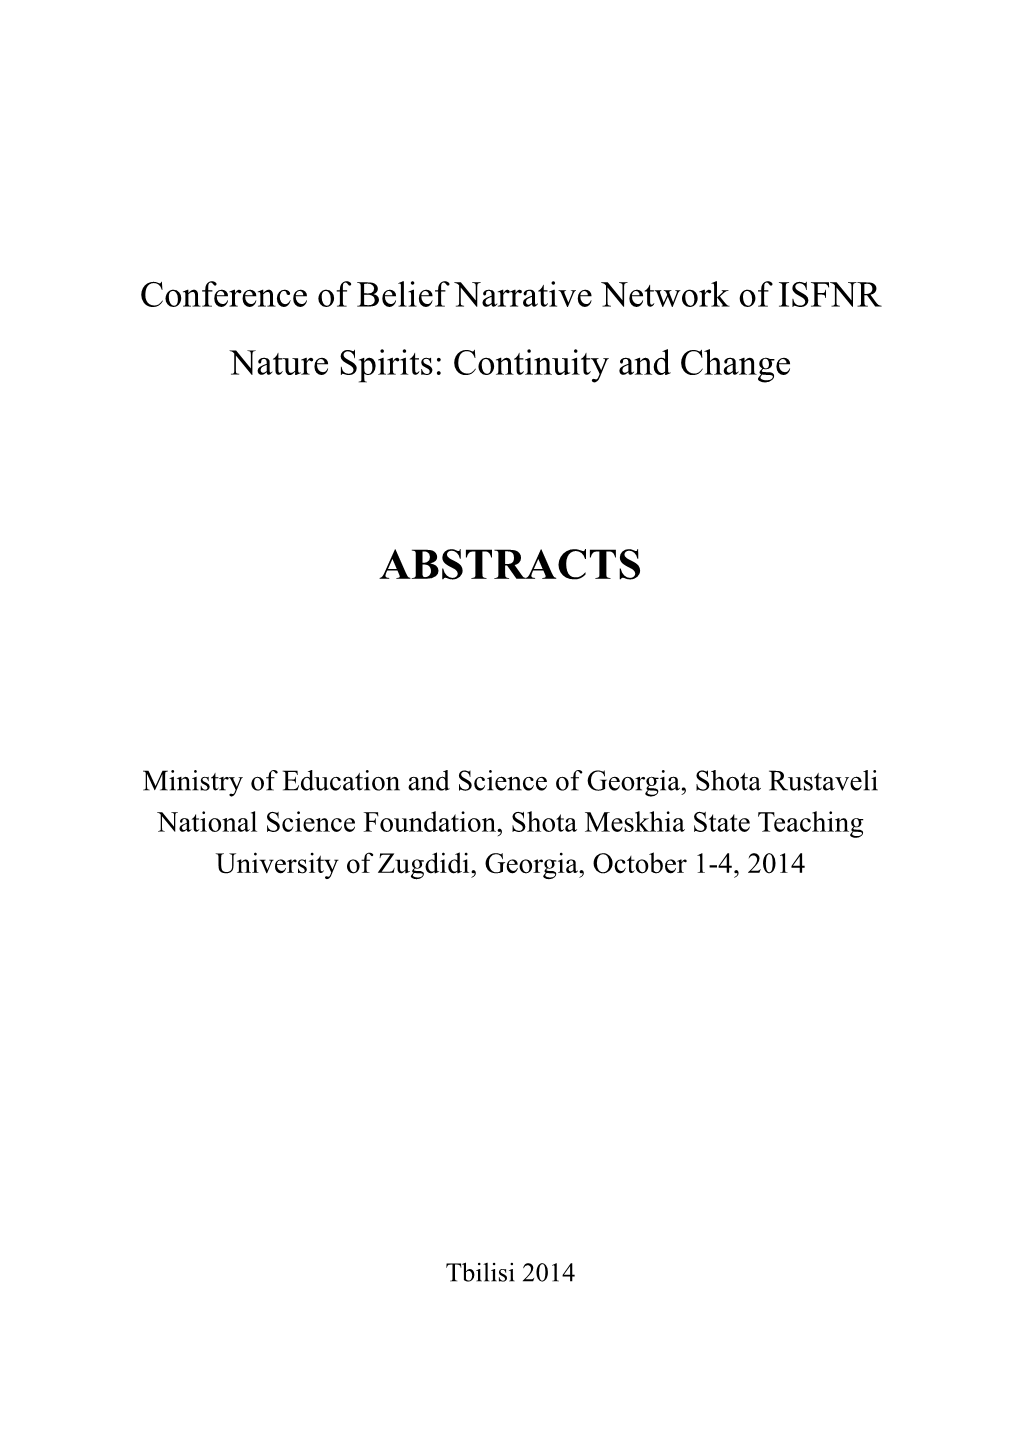 Abstracts of the BNN Conference in Zugdidi